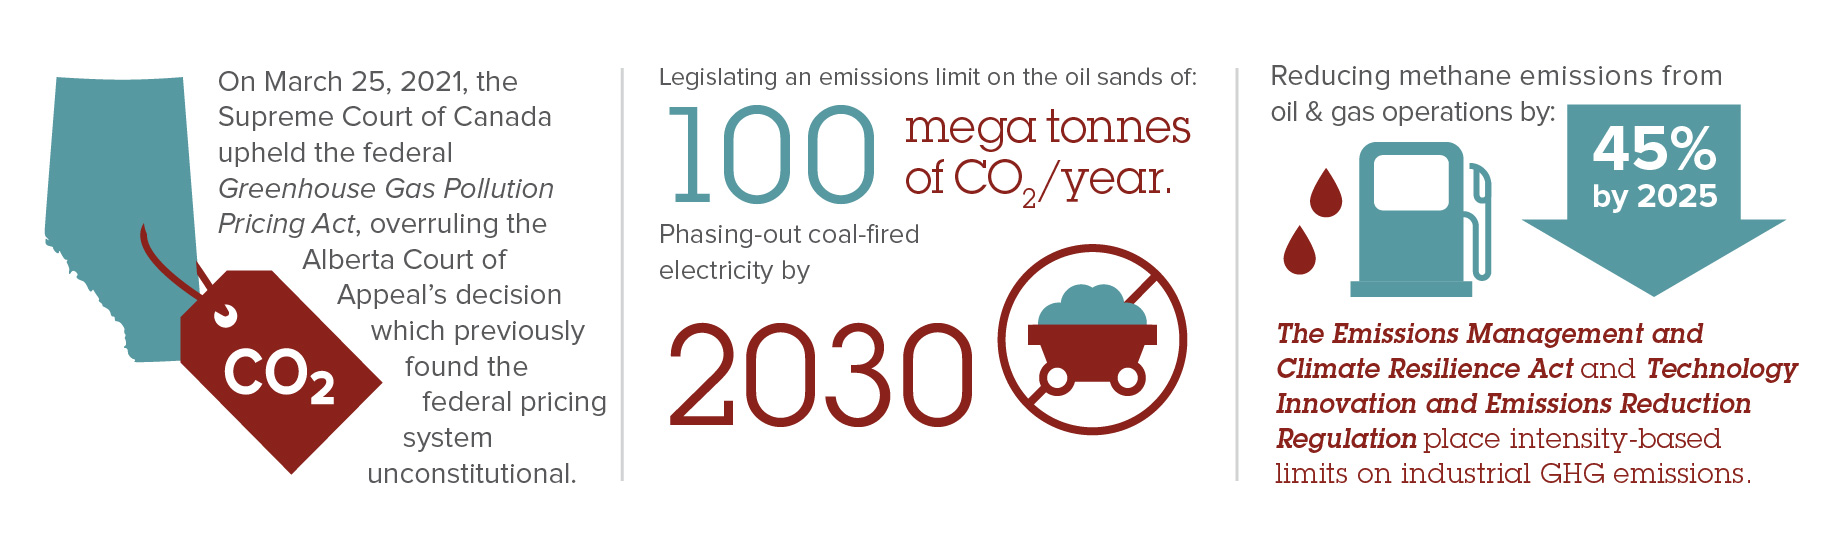 Carbon and greenhouse gas legislation infographic for Alberta